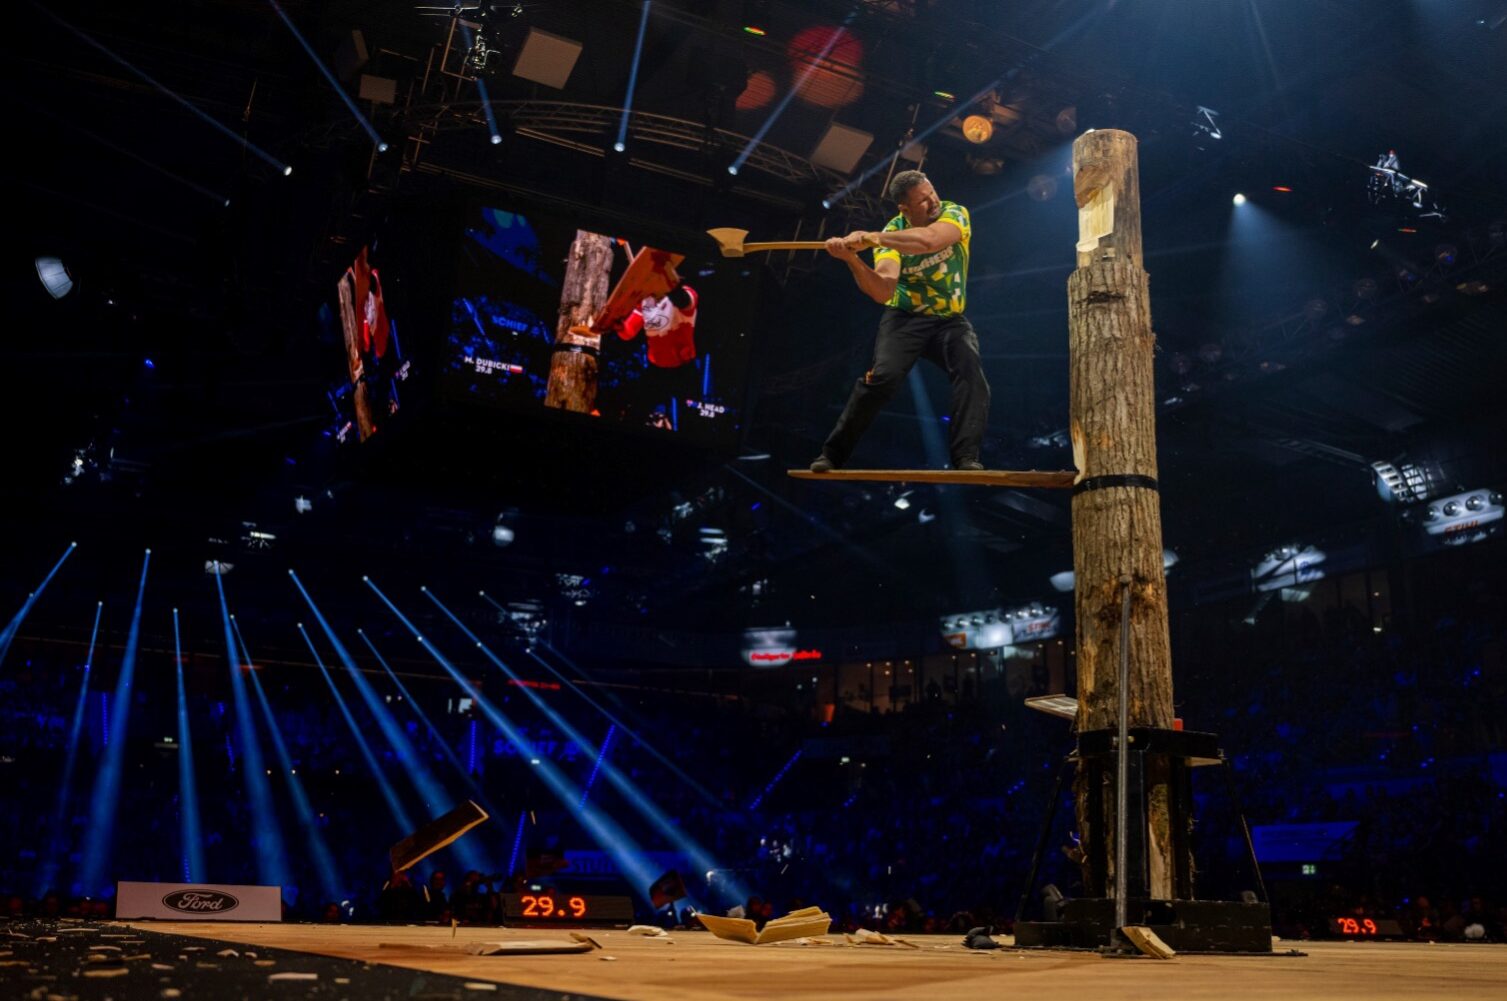 STIHL TIMBERSPORTS® Media Pool – All the videos, photos and press